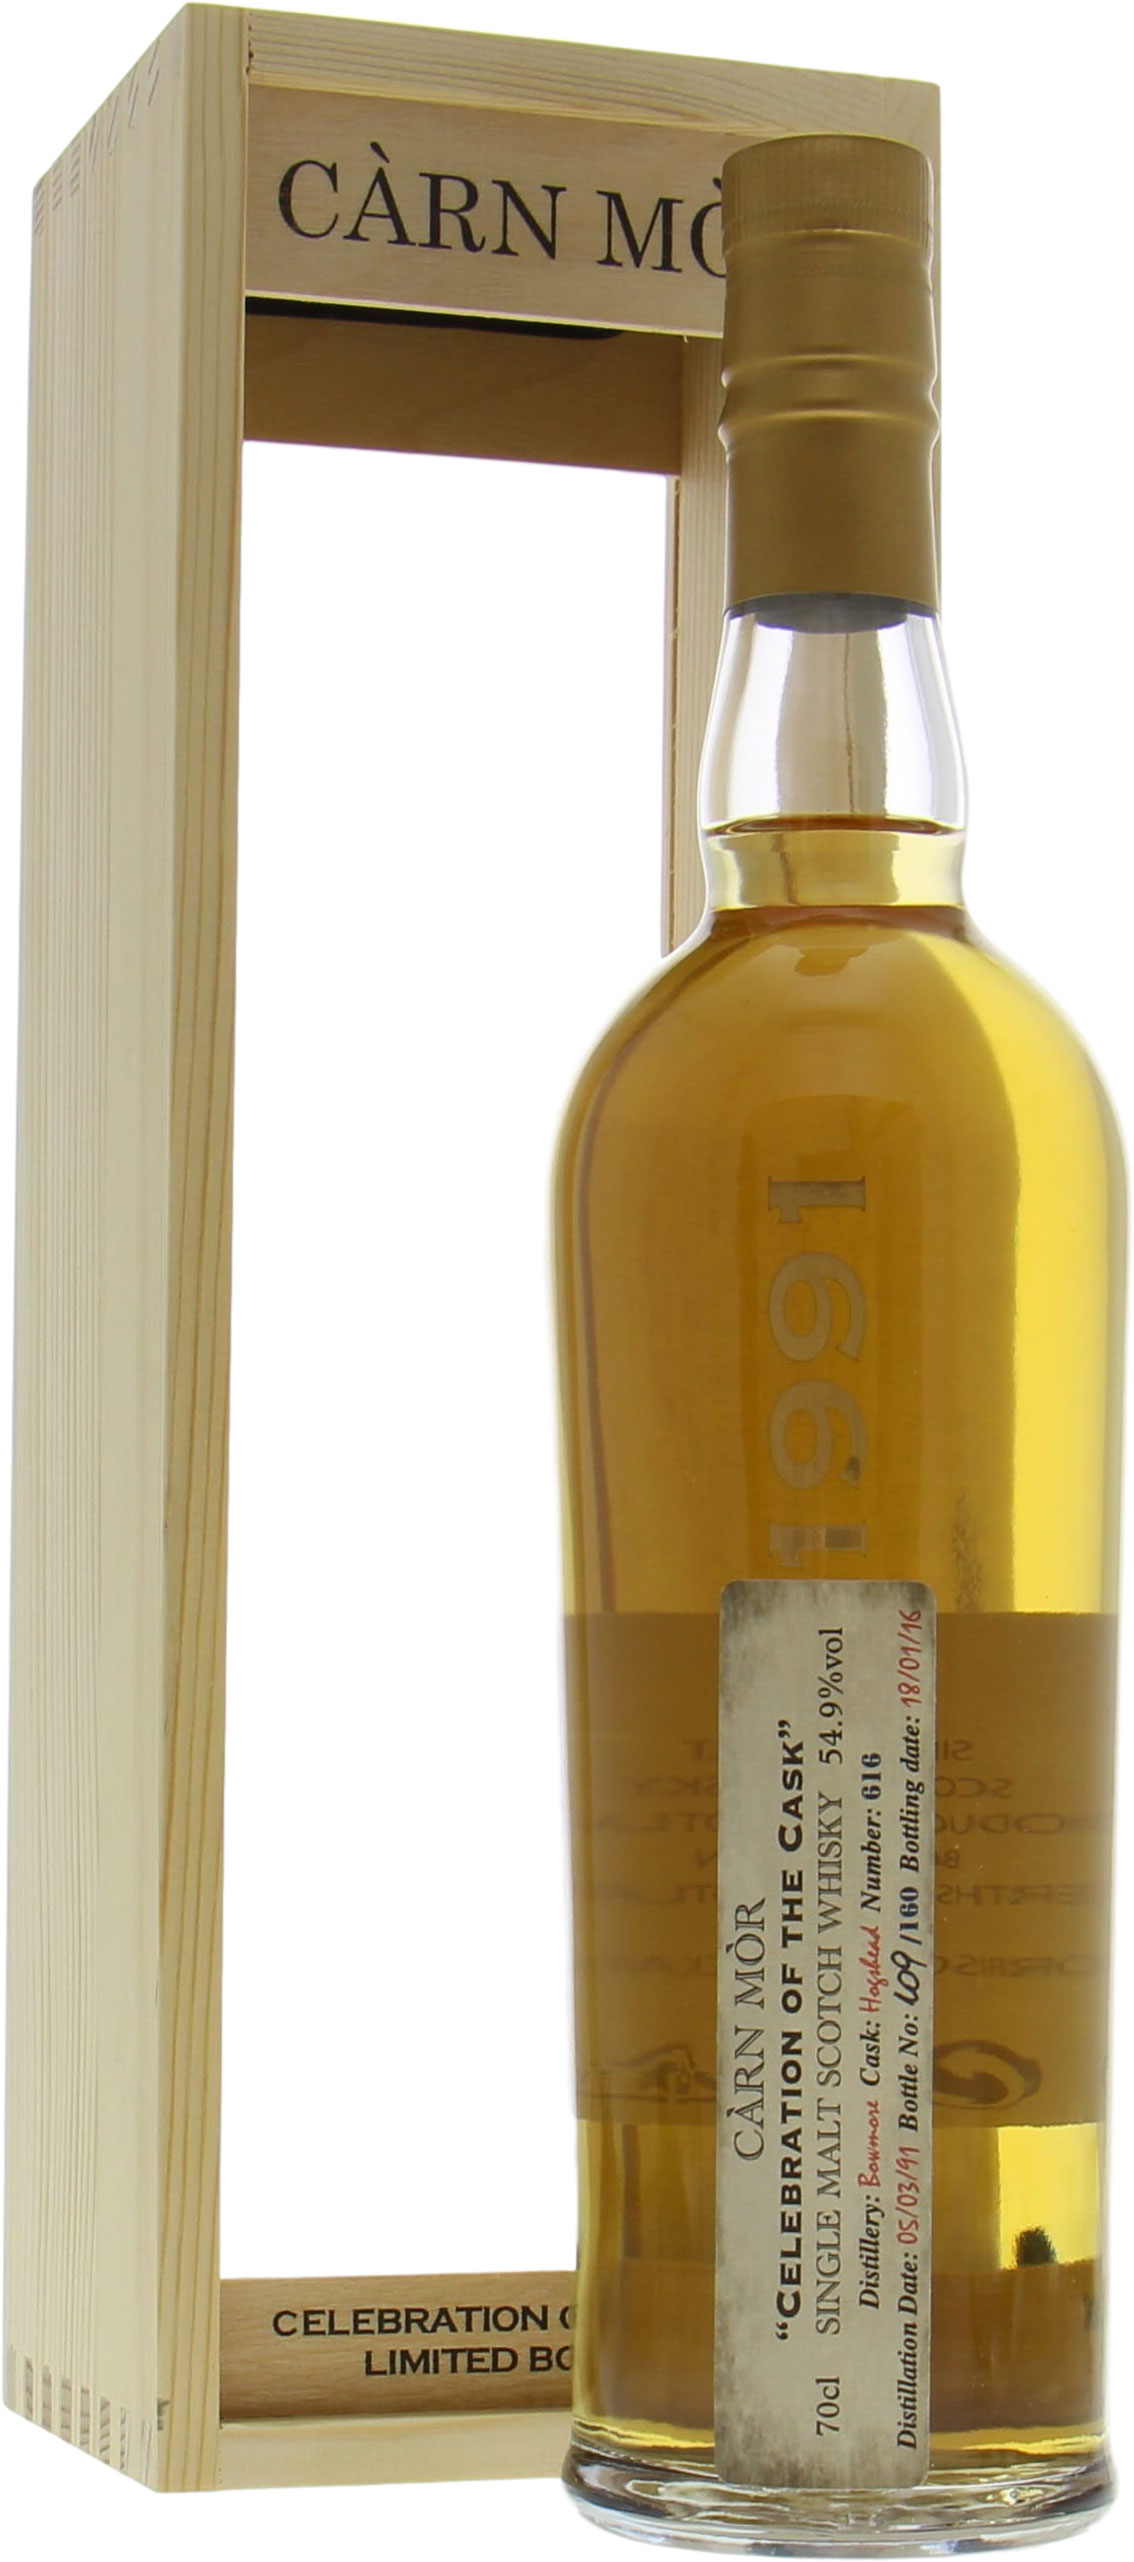 Bowmore - 24 Years Old Celebration of the Cask 616 54.9% 1990 In Original Wooden Case